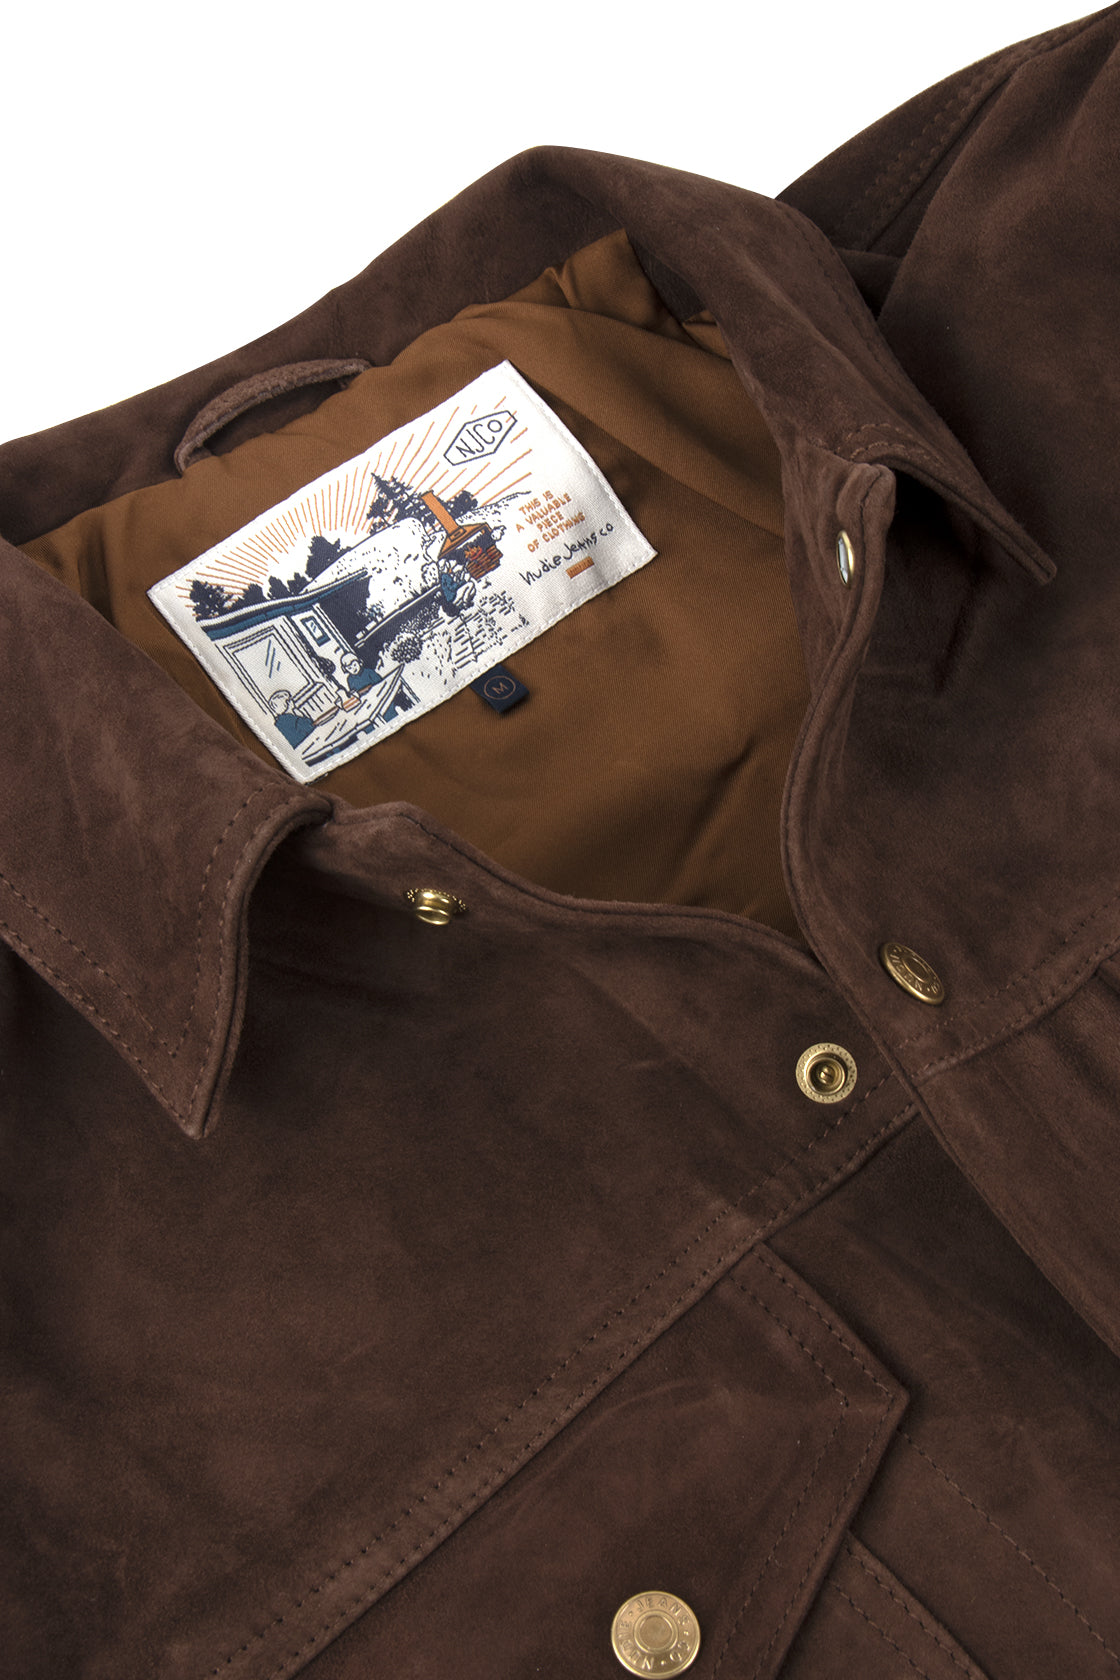 Cooper nubuck leather jacket. Rugged, characterful and hard wearing